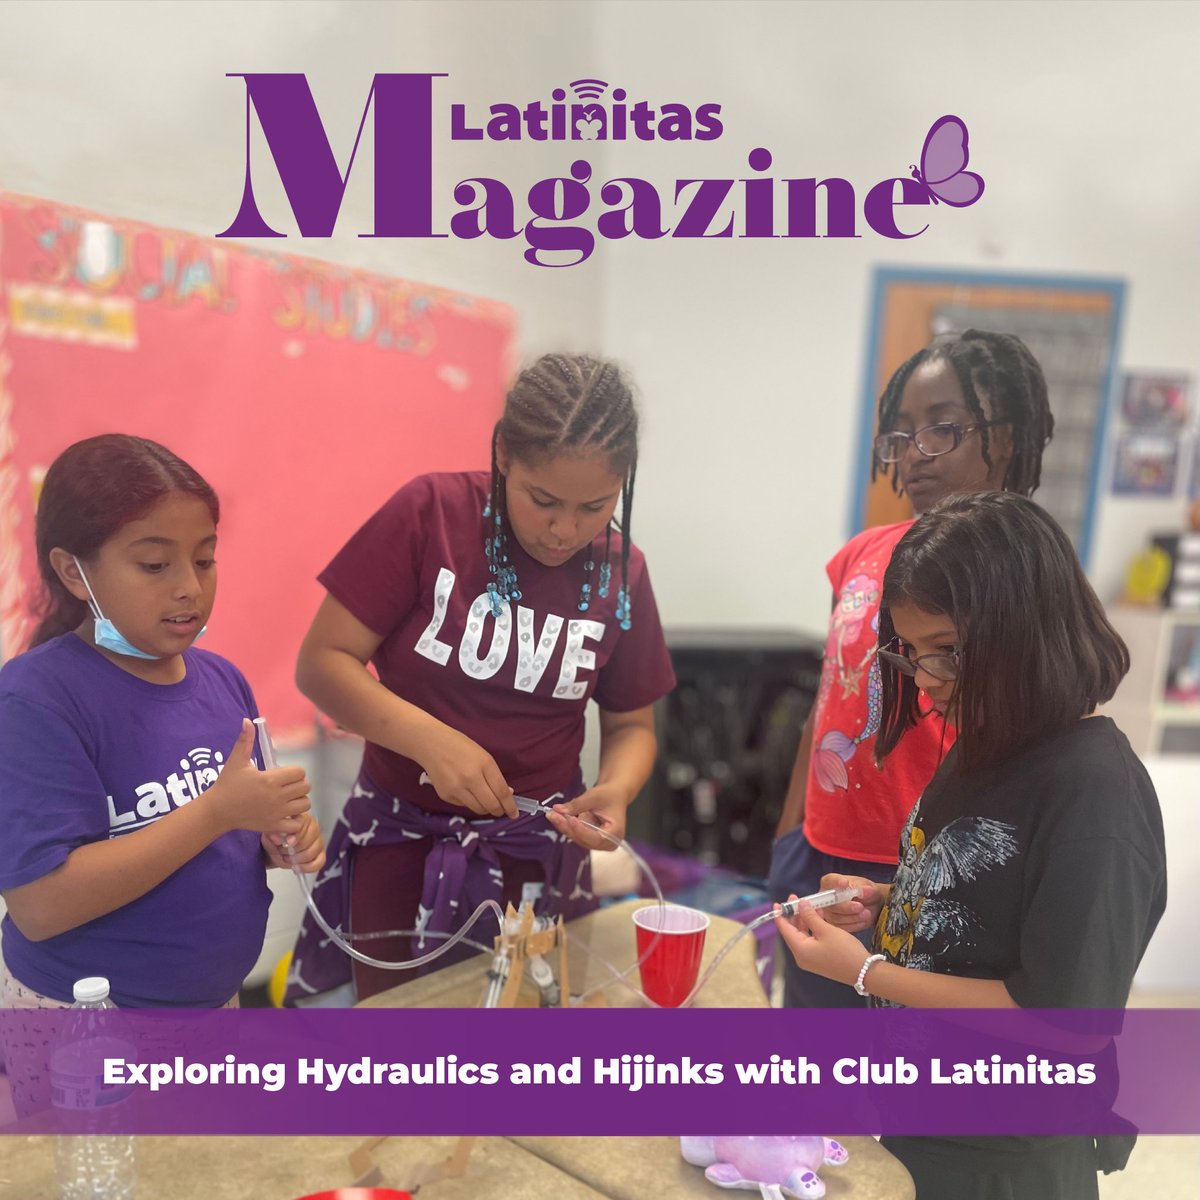 Exploring Hydraulics and Hijinks with Club Latinitas latinitasmagazine.org/exploring-hydr…